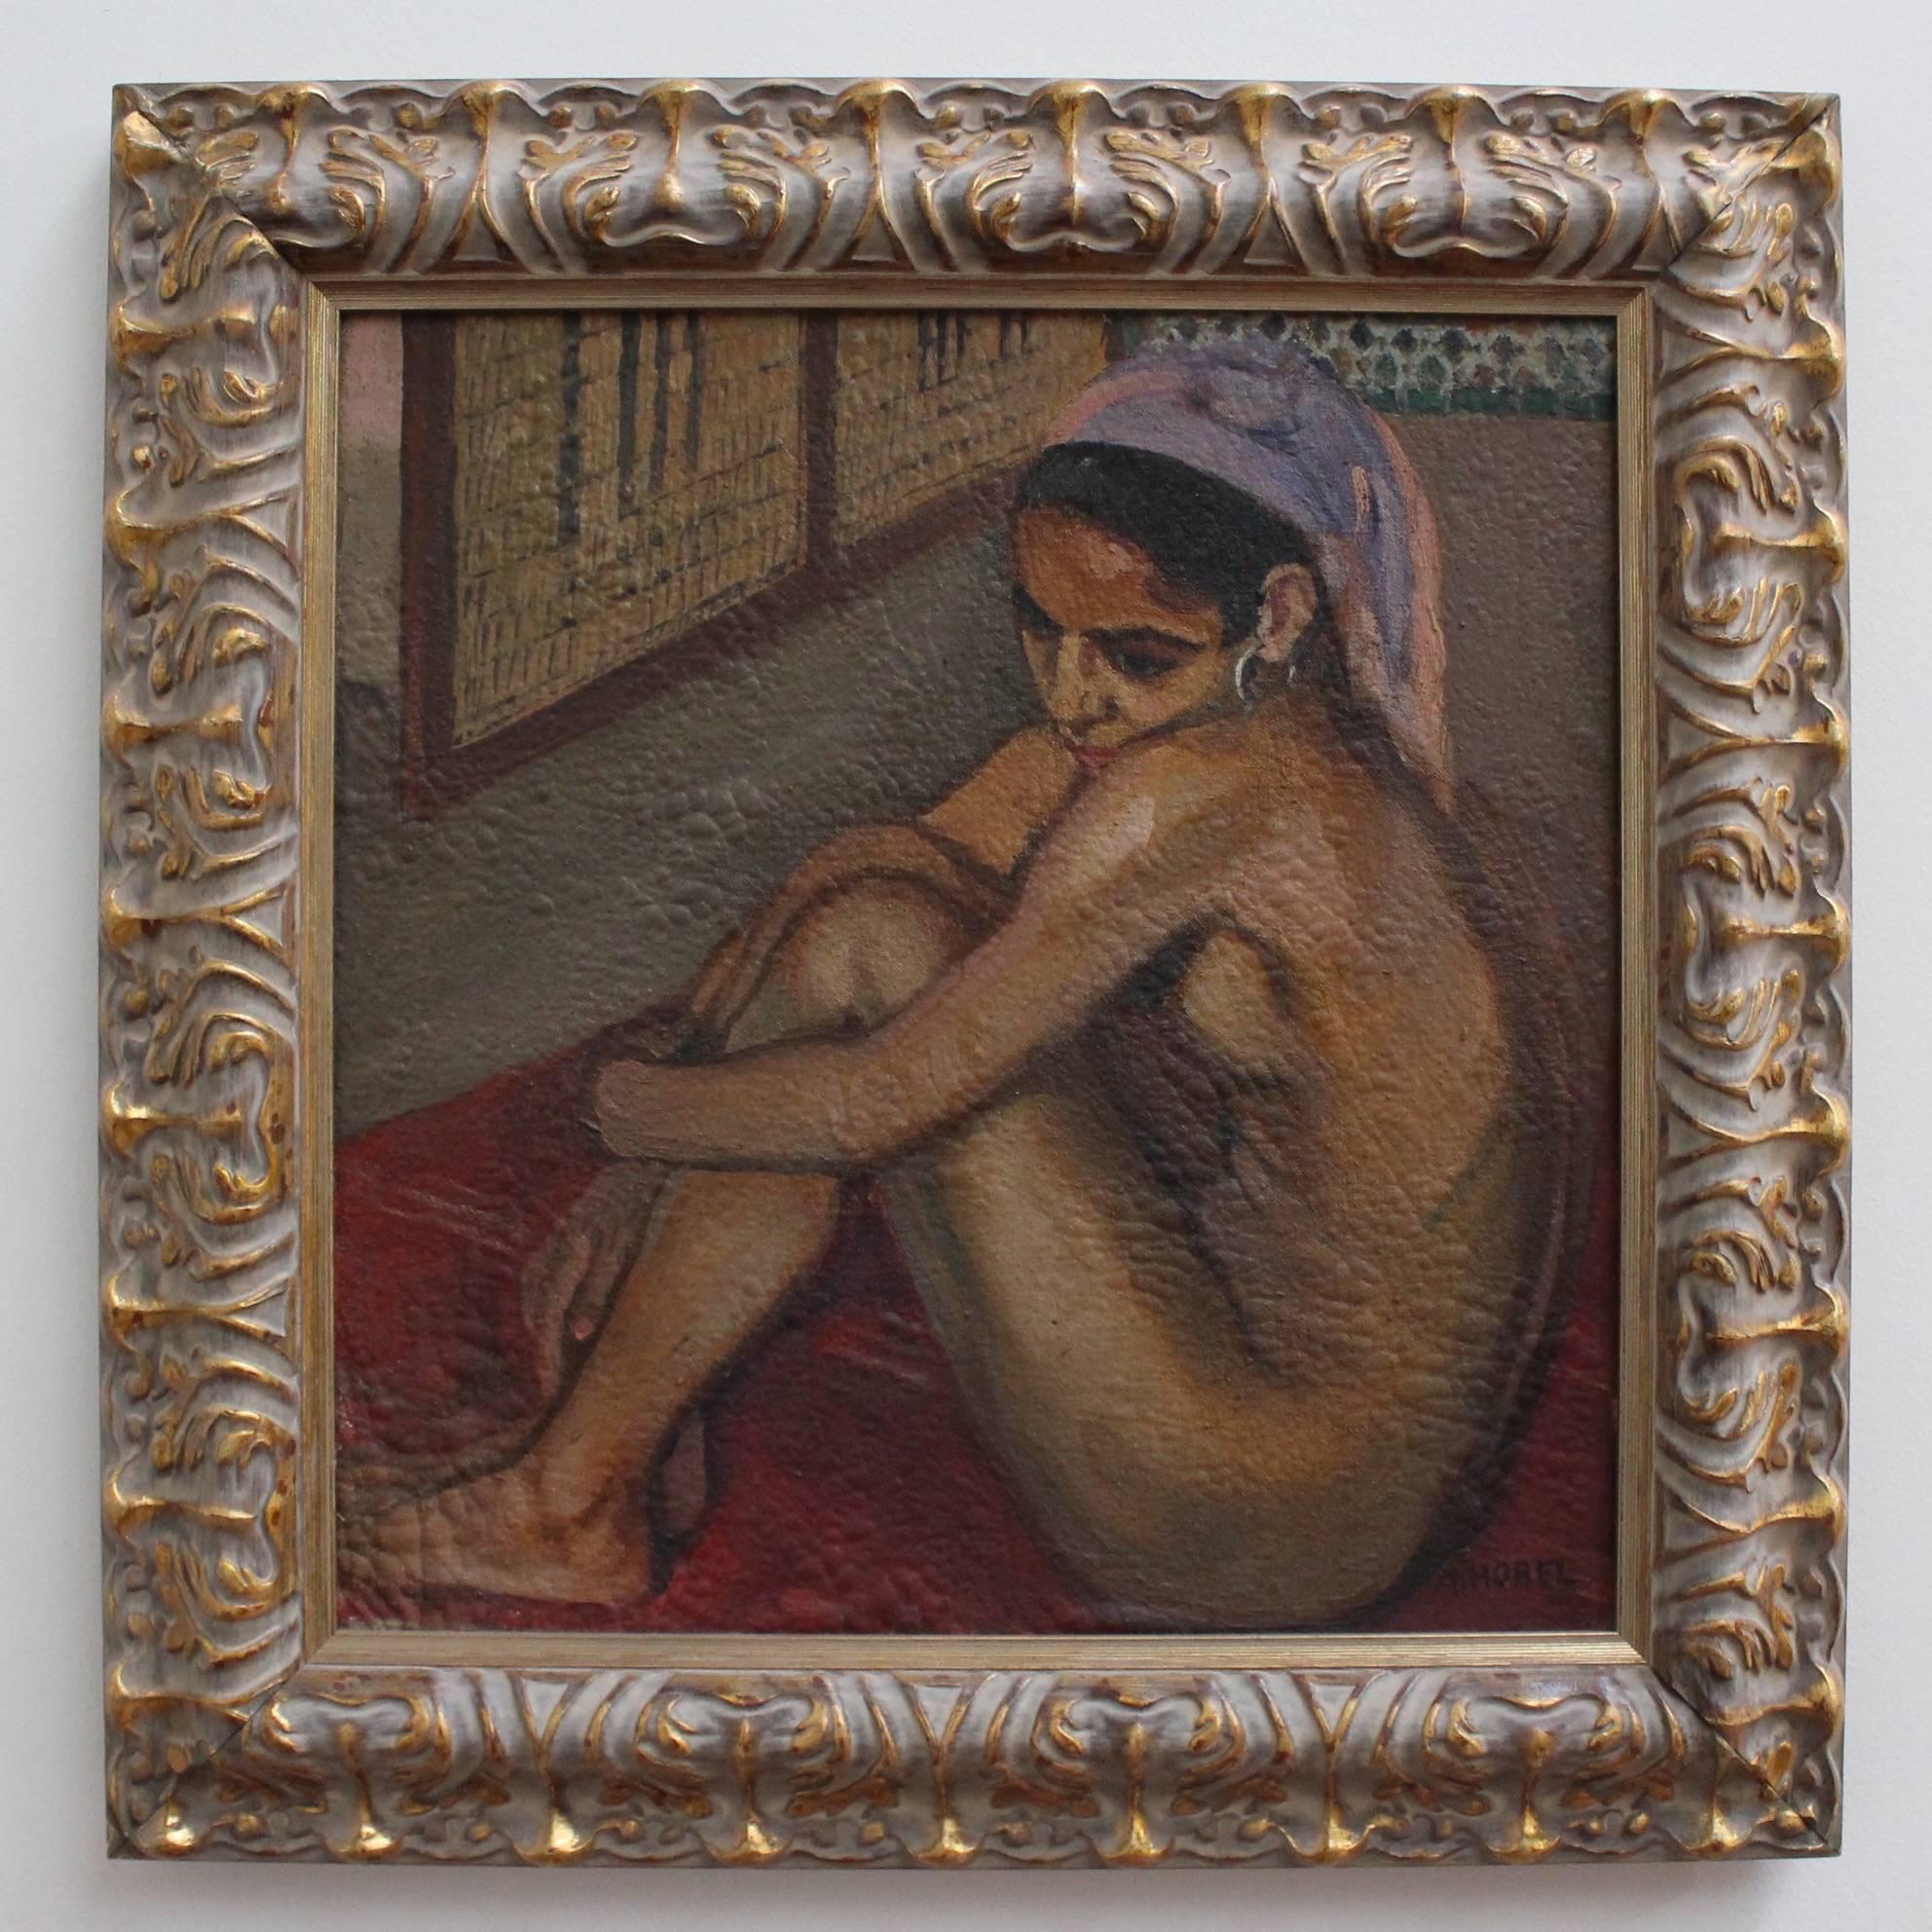 Nude Moroccan Woman - Painting by Albert Horel